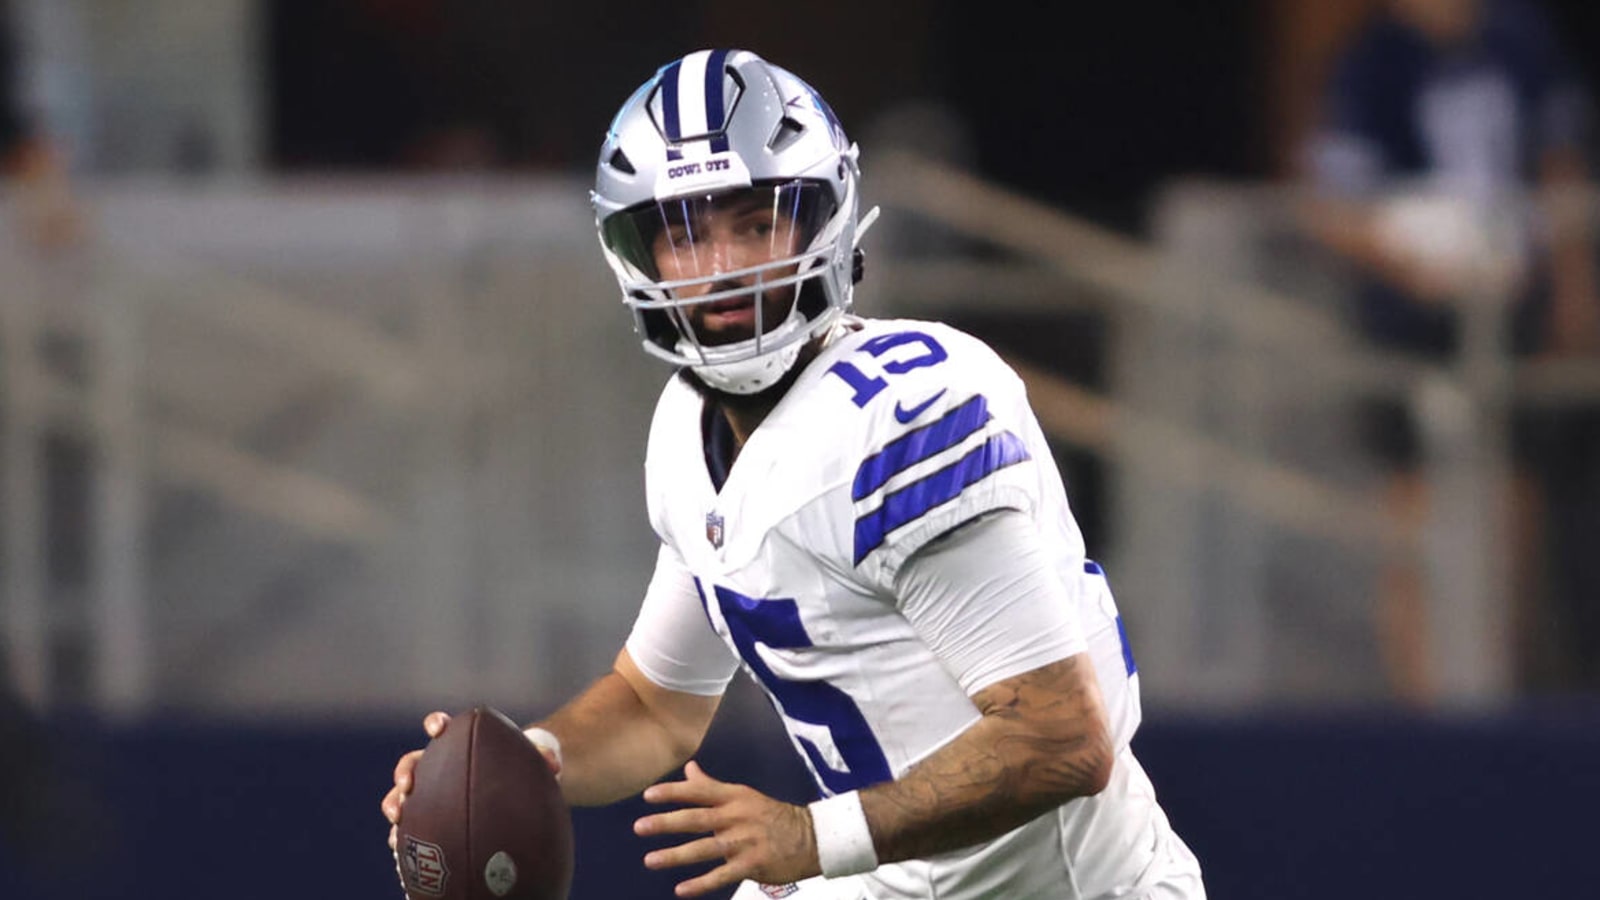 Journeyman backup QB signs with NFC East team